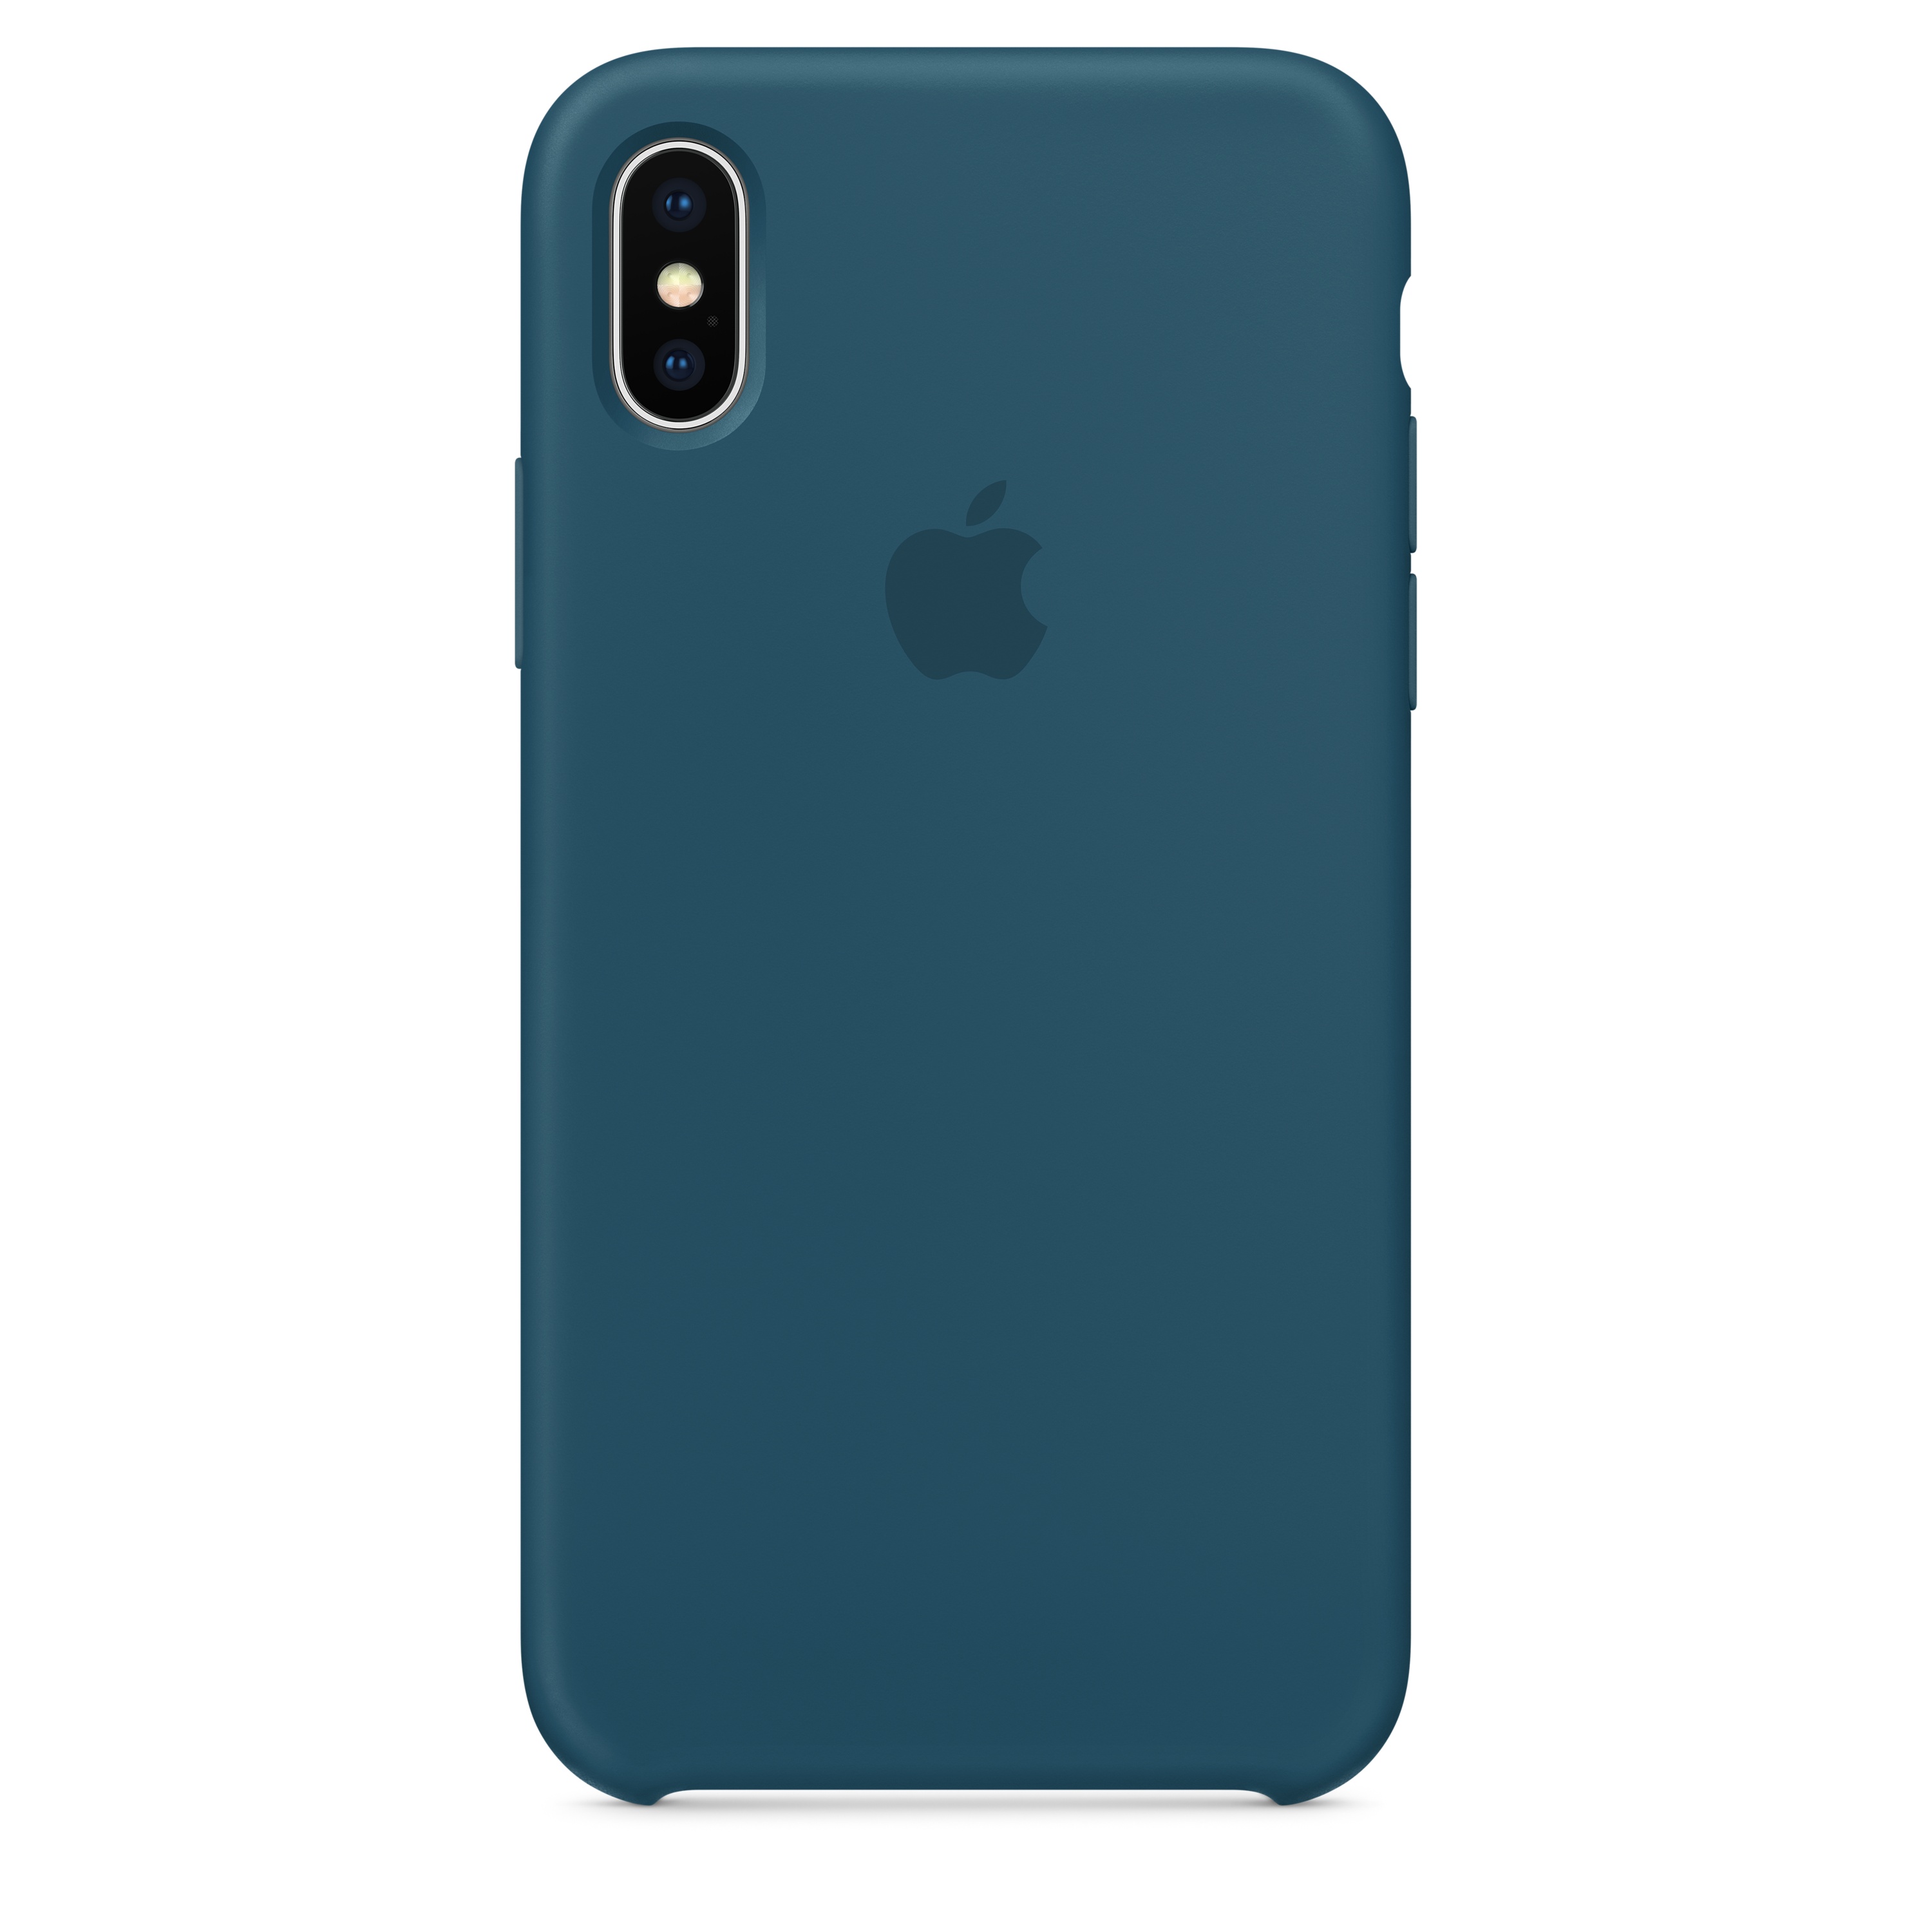 Refurbished Apple MR6G2ZM/A Silicone Case for iPhone X - Cosmos Blue - image 1 of 5